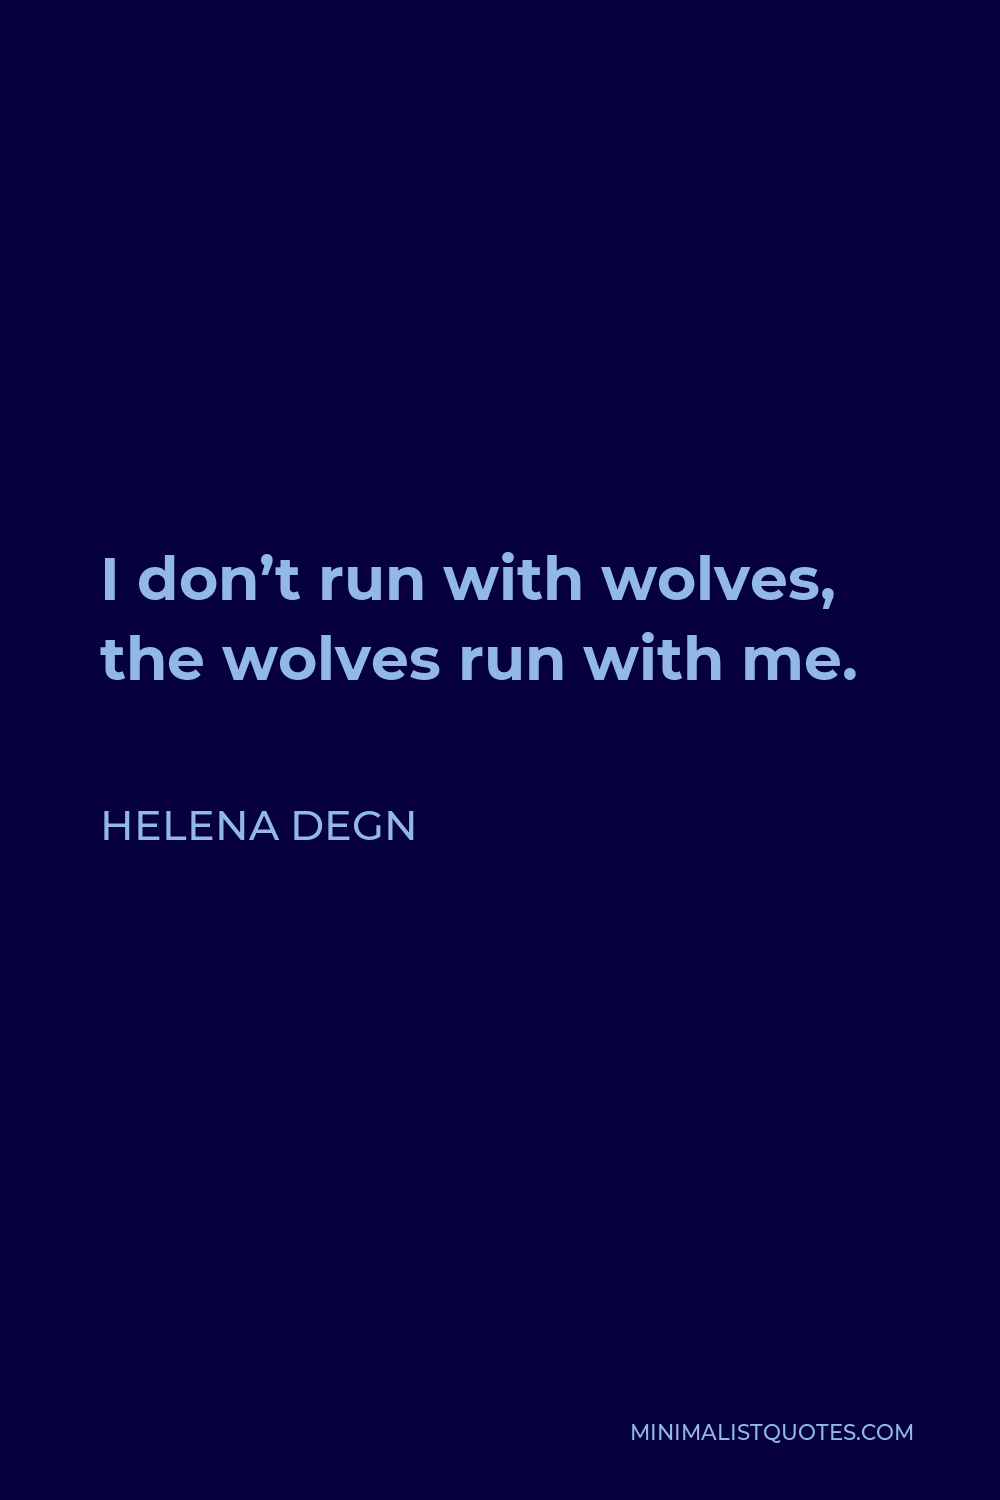 Helena Degn Quote - I don’t run with wolves, the wolves run with me.